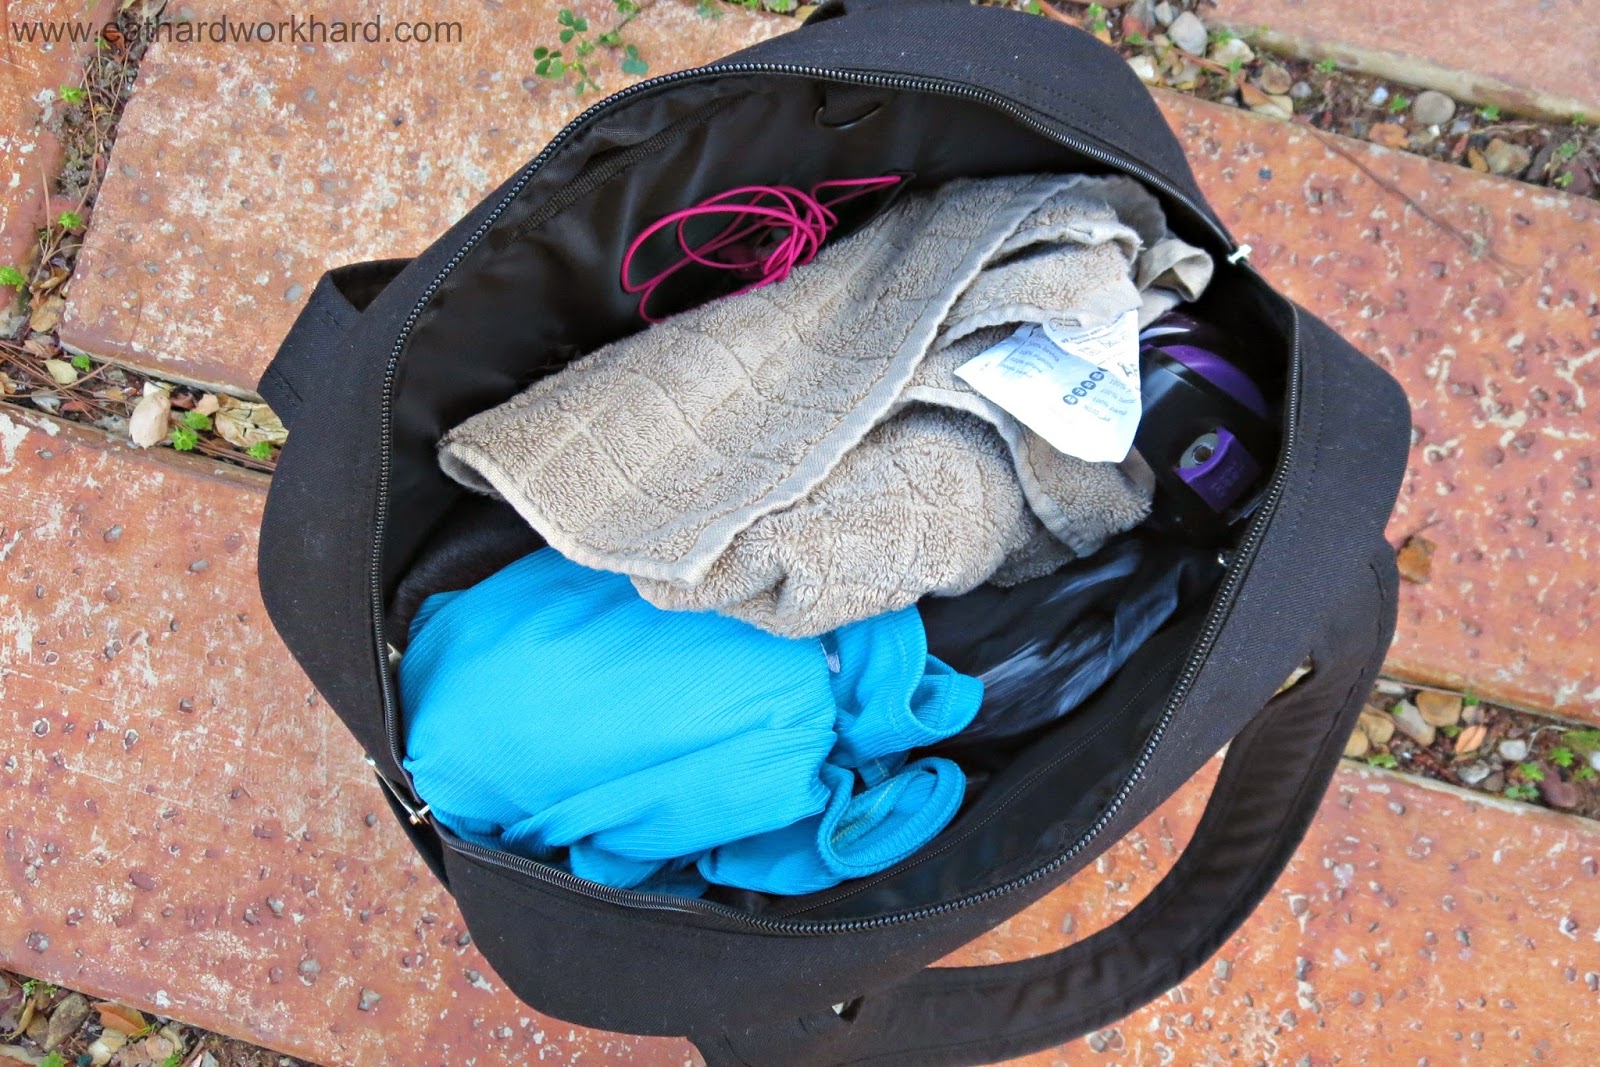 Eat Hard Work Hard: Gaiam Everything Fits Gym Bag Review